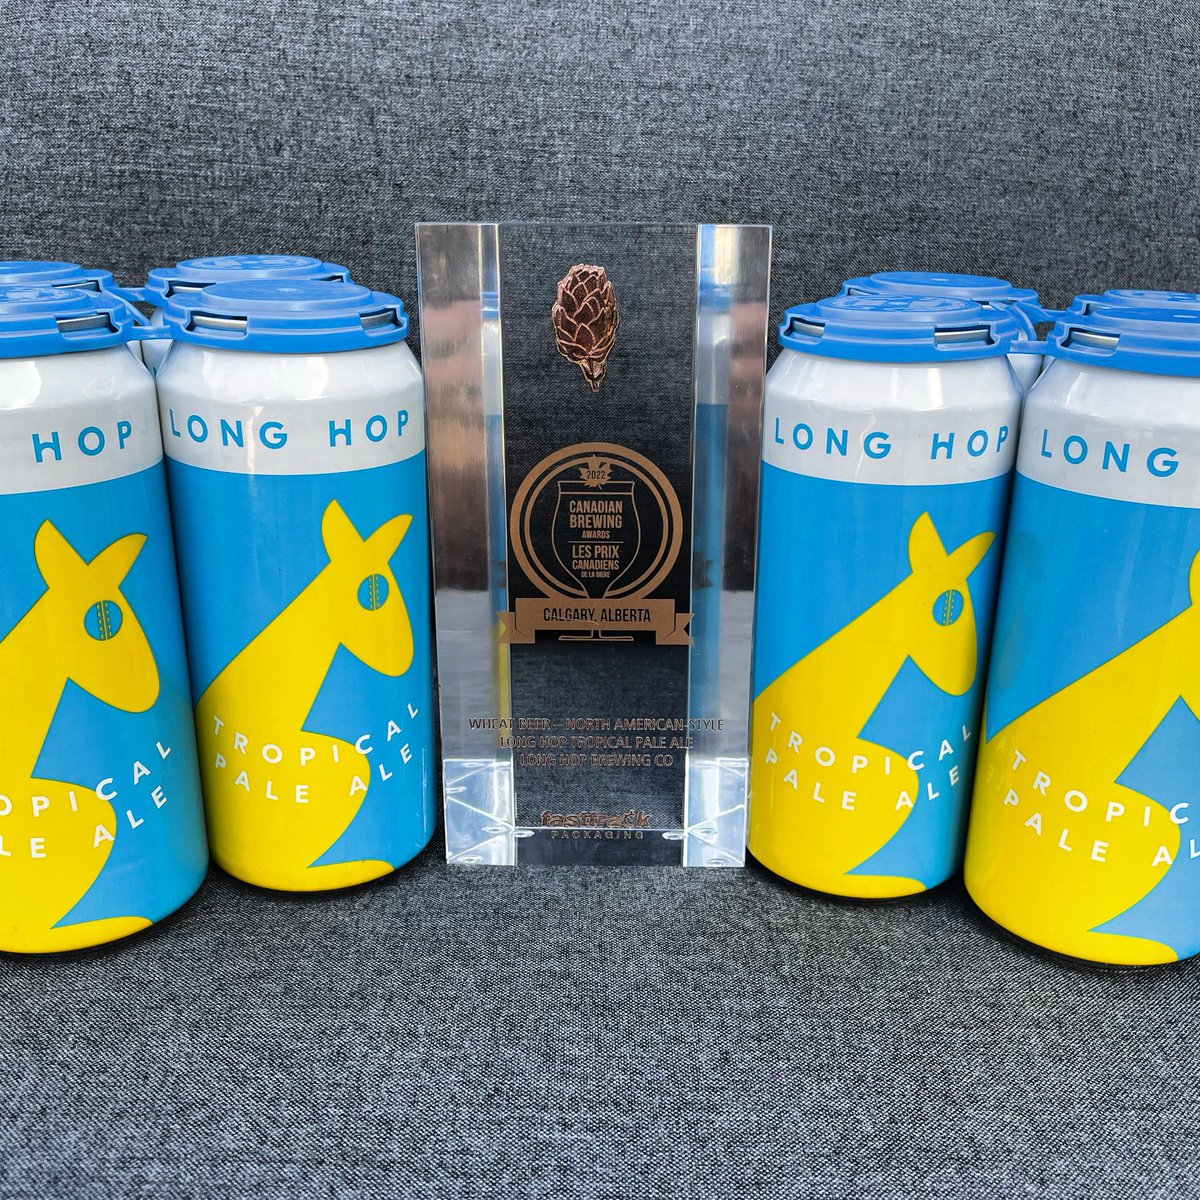 🏝Let’s Get Tropical!🏝 We are super excited to share that our Tropical Pale Ale won bronze at the Canadian Brewing Awards for Wheat Beer - North American-Style